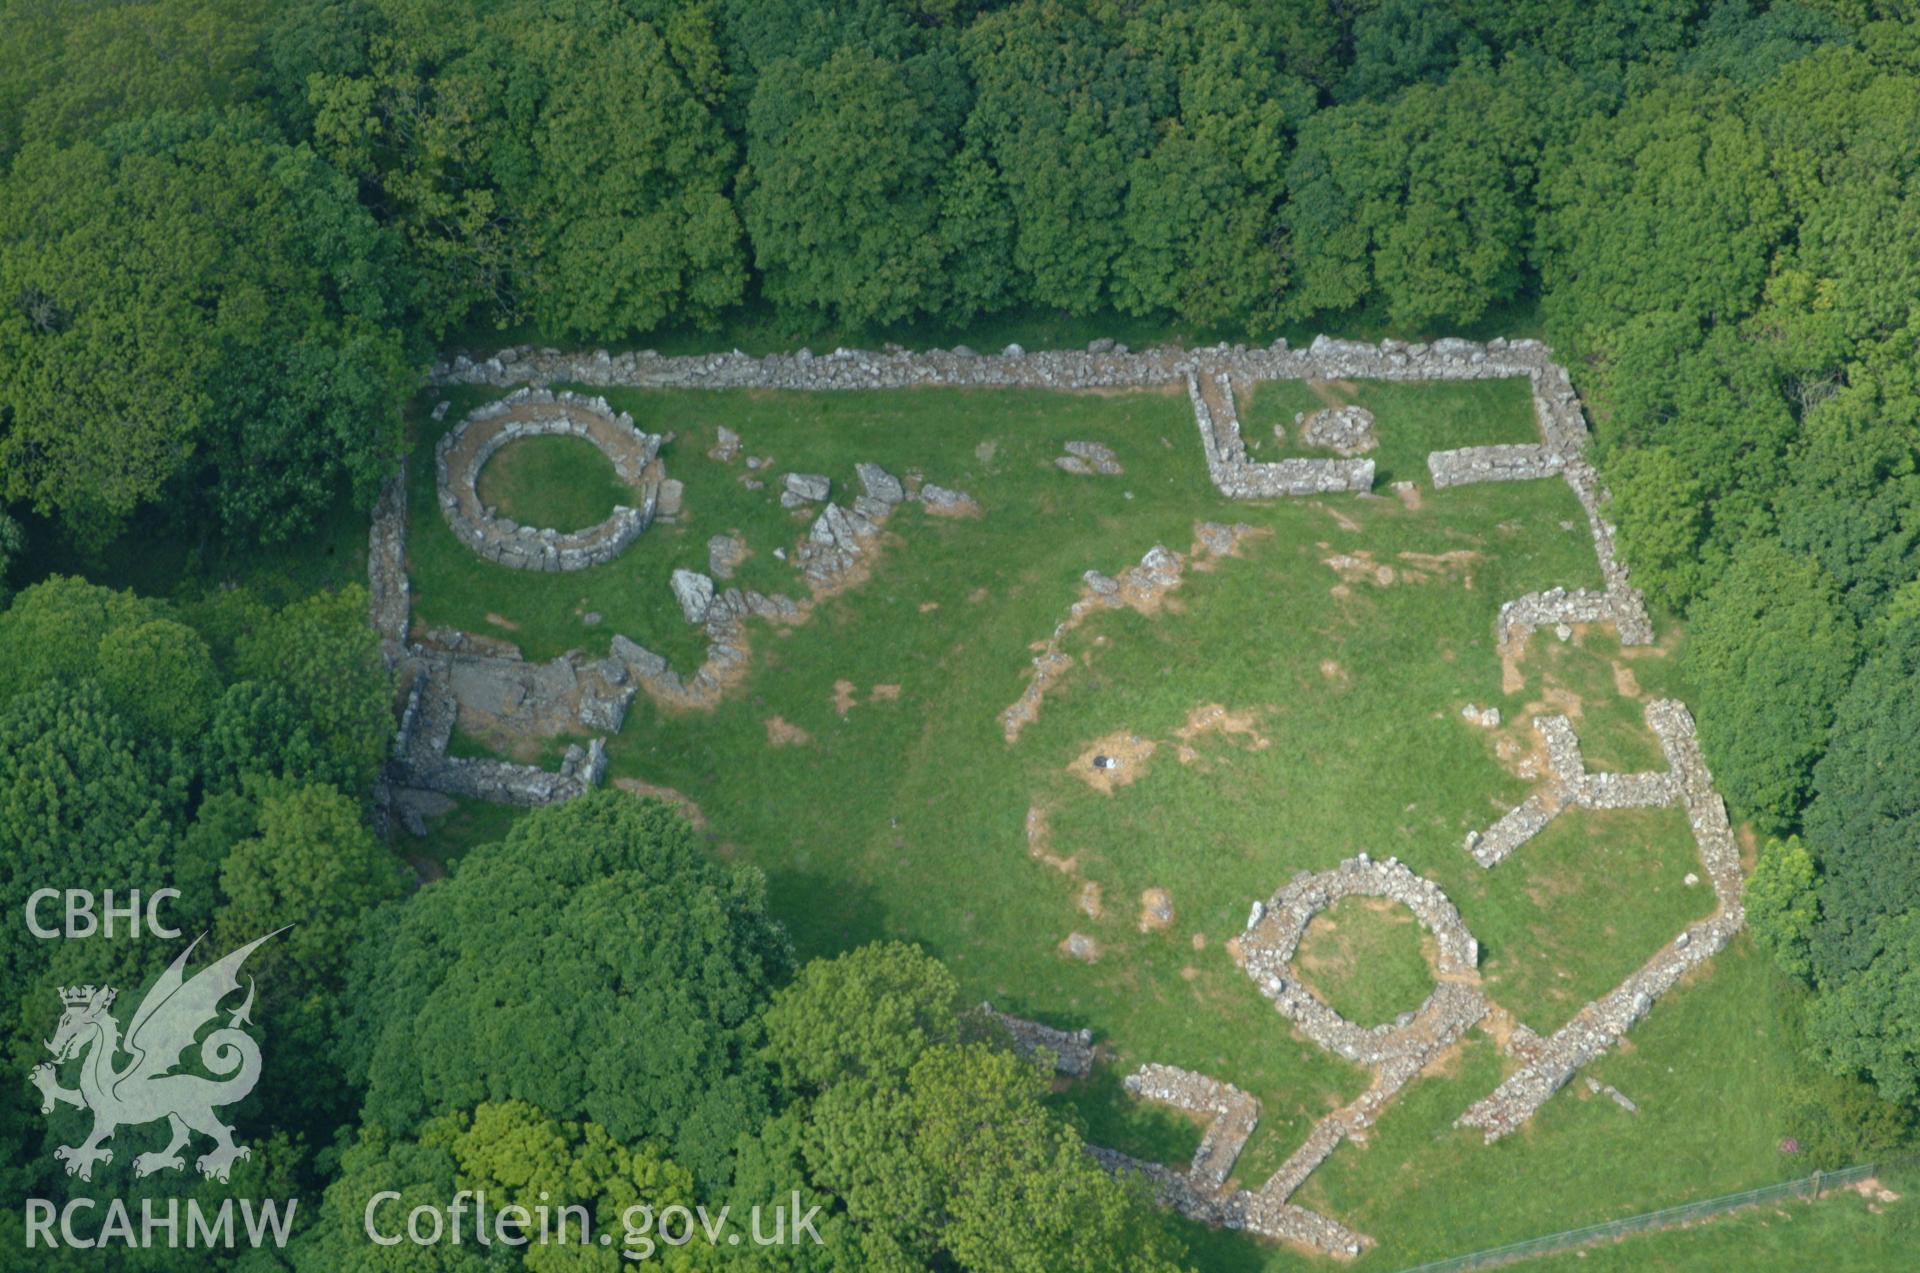 RCAHMW colour oblique aerial photograph of Din Lligwy settlement, Moelfre taken on 26/05/2004 by Toby Driver